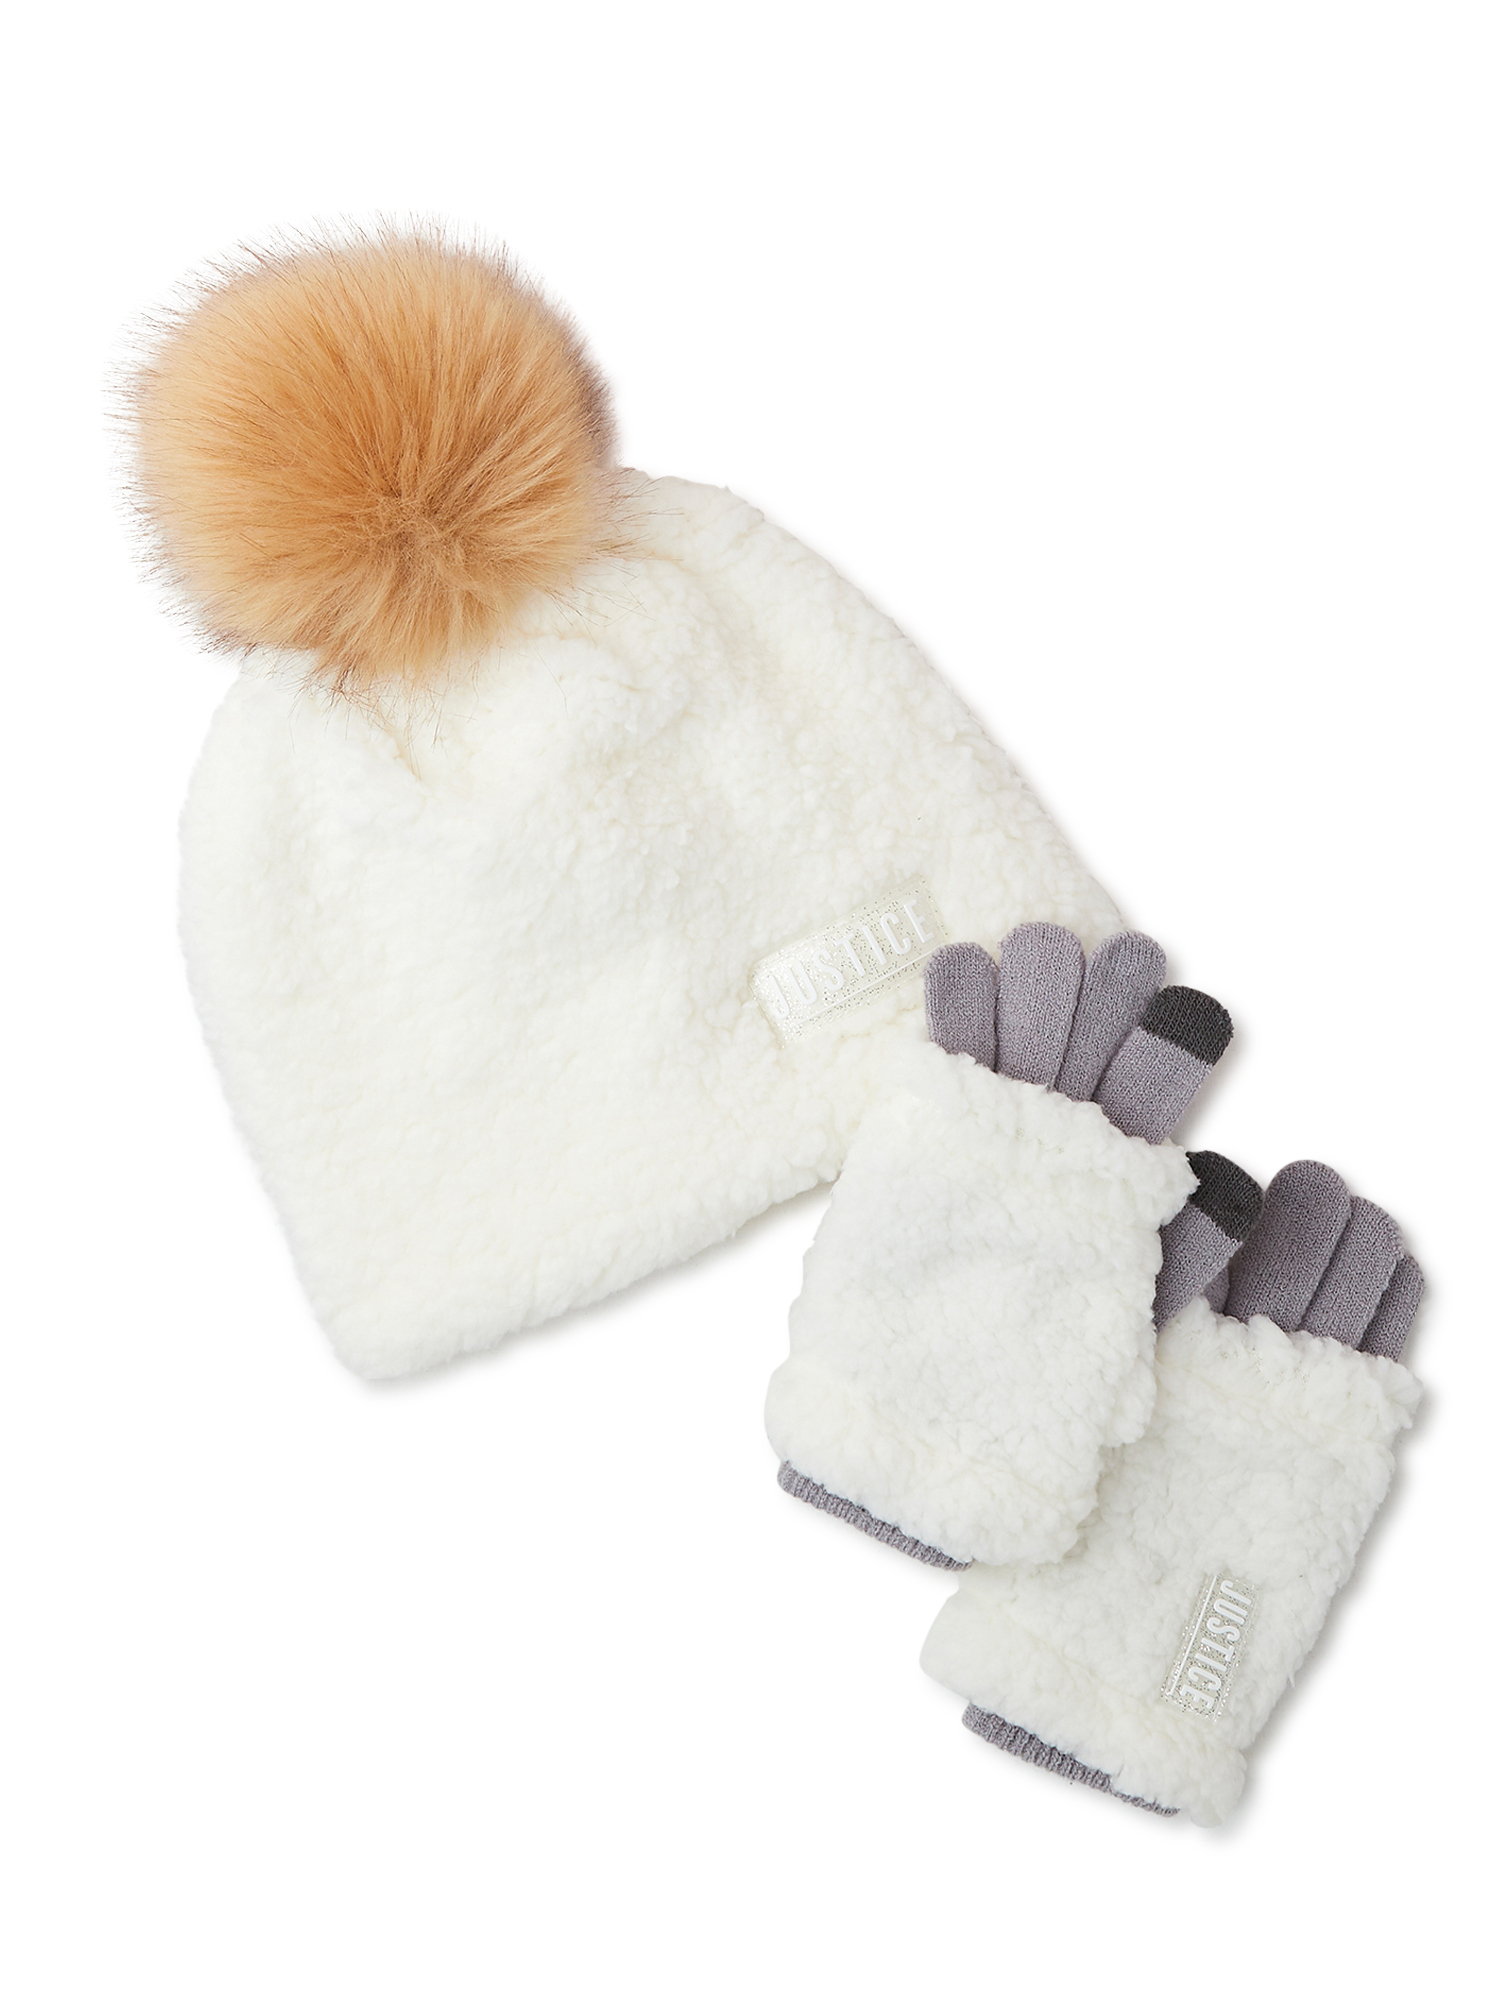 Justice Girls Beanie with Pom and Gloves, 2-Piece Cold Weather Set, One Size - image 2 of 3